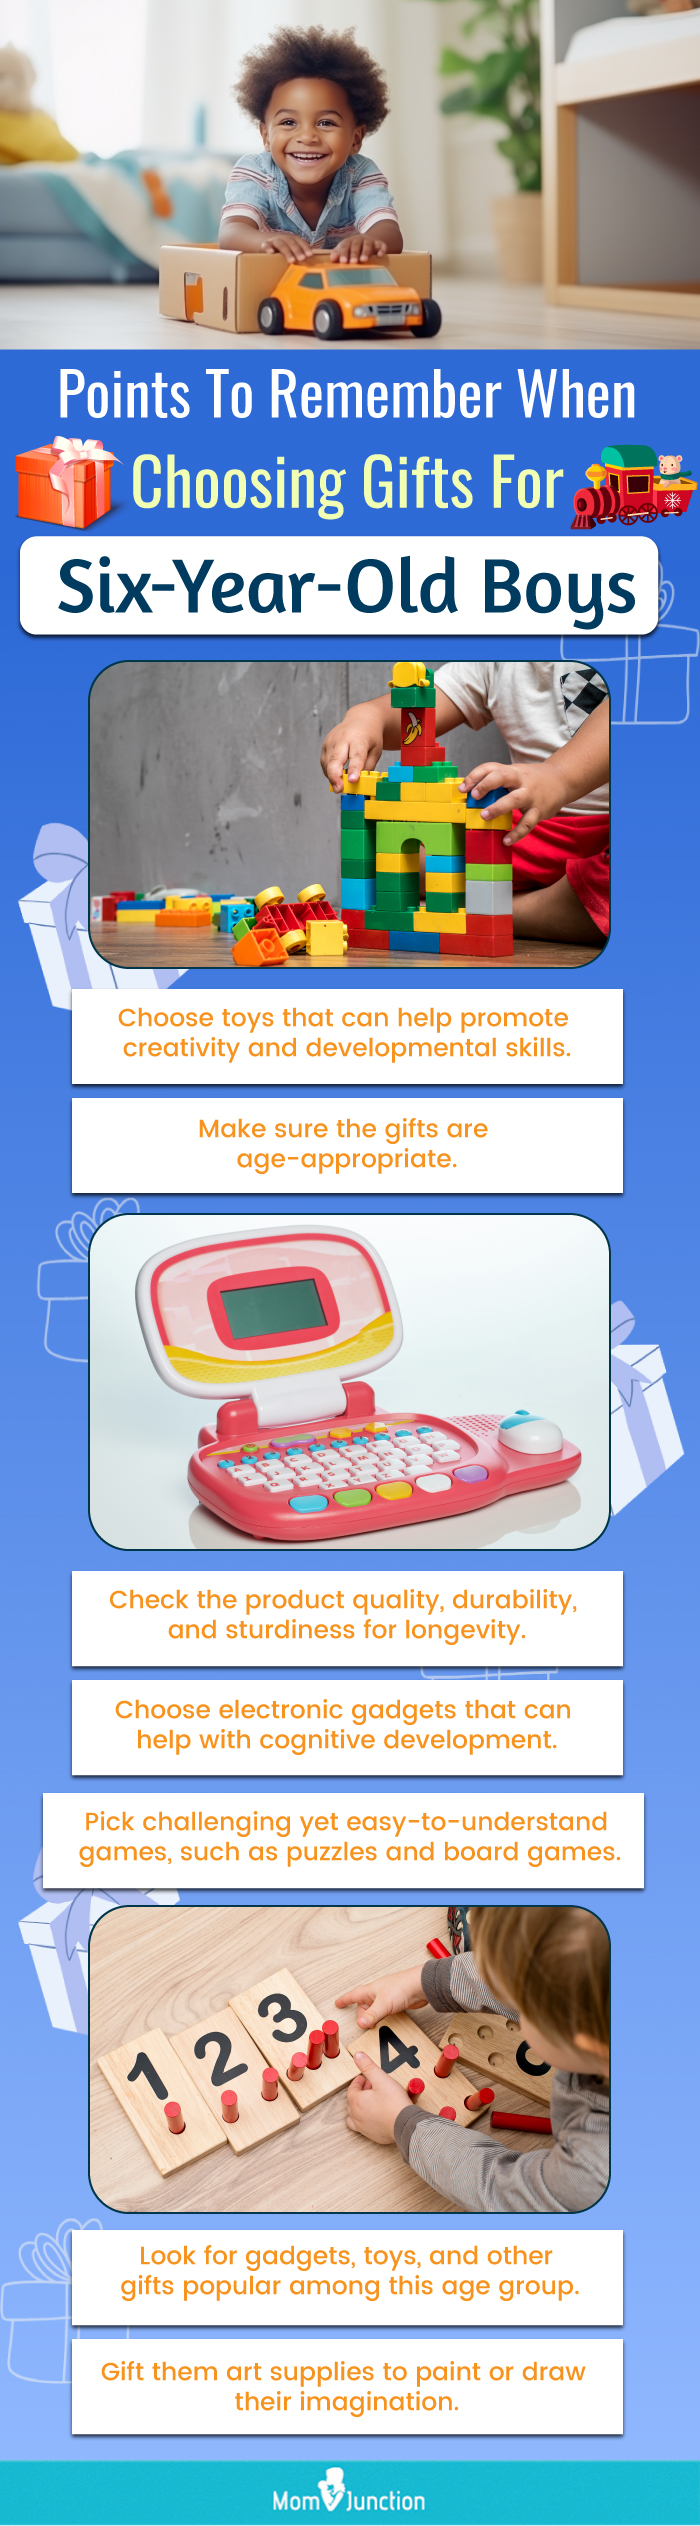 Points To Remember When Choosing Gifts For Six Year Old Boys (infographic)